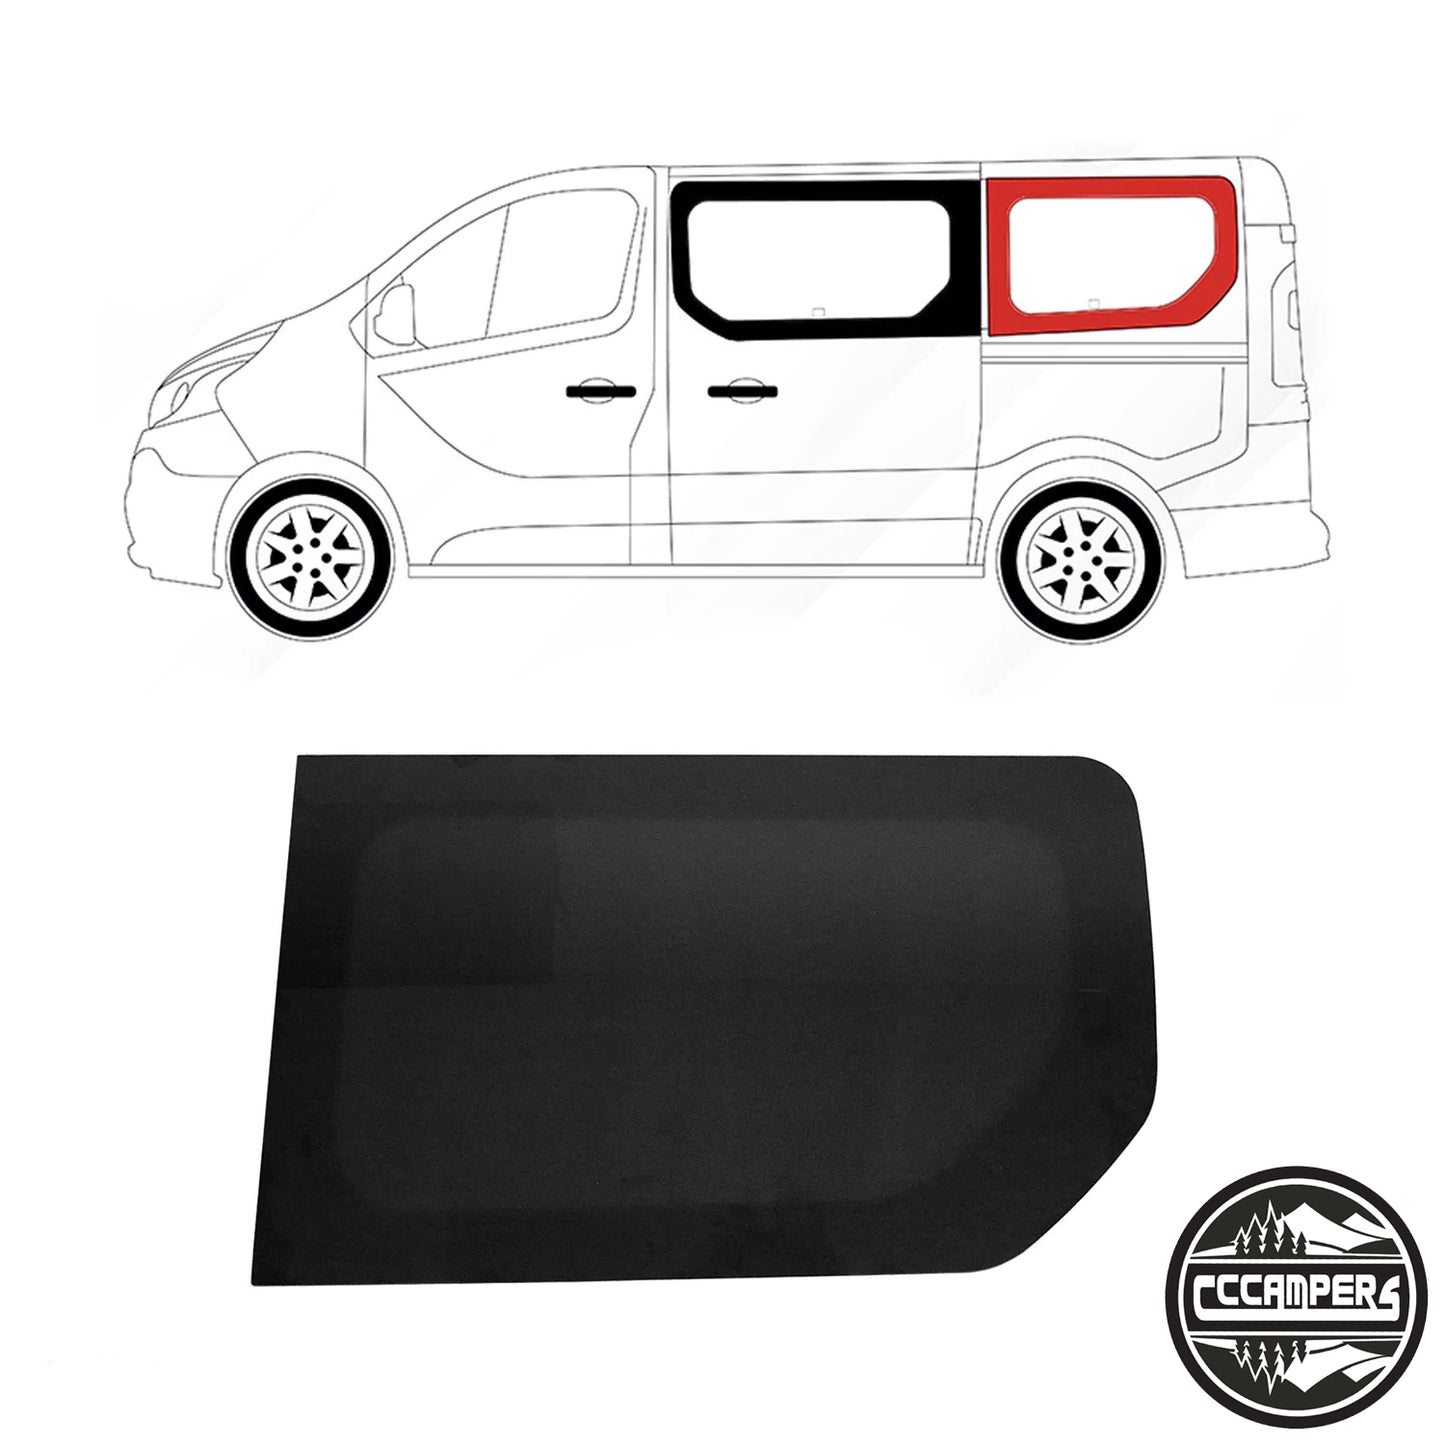 New Shape Renault Trafic, Nissan NV300, Fiat Talento or (Vauxhall Vivaro 2014 - 2018 X82) Glass Window Fully fitted